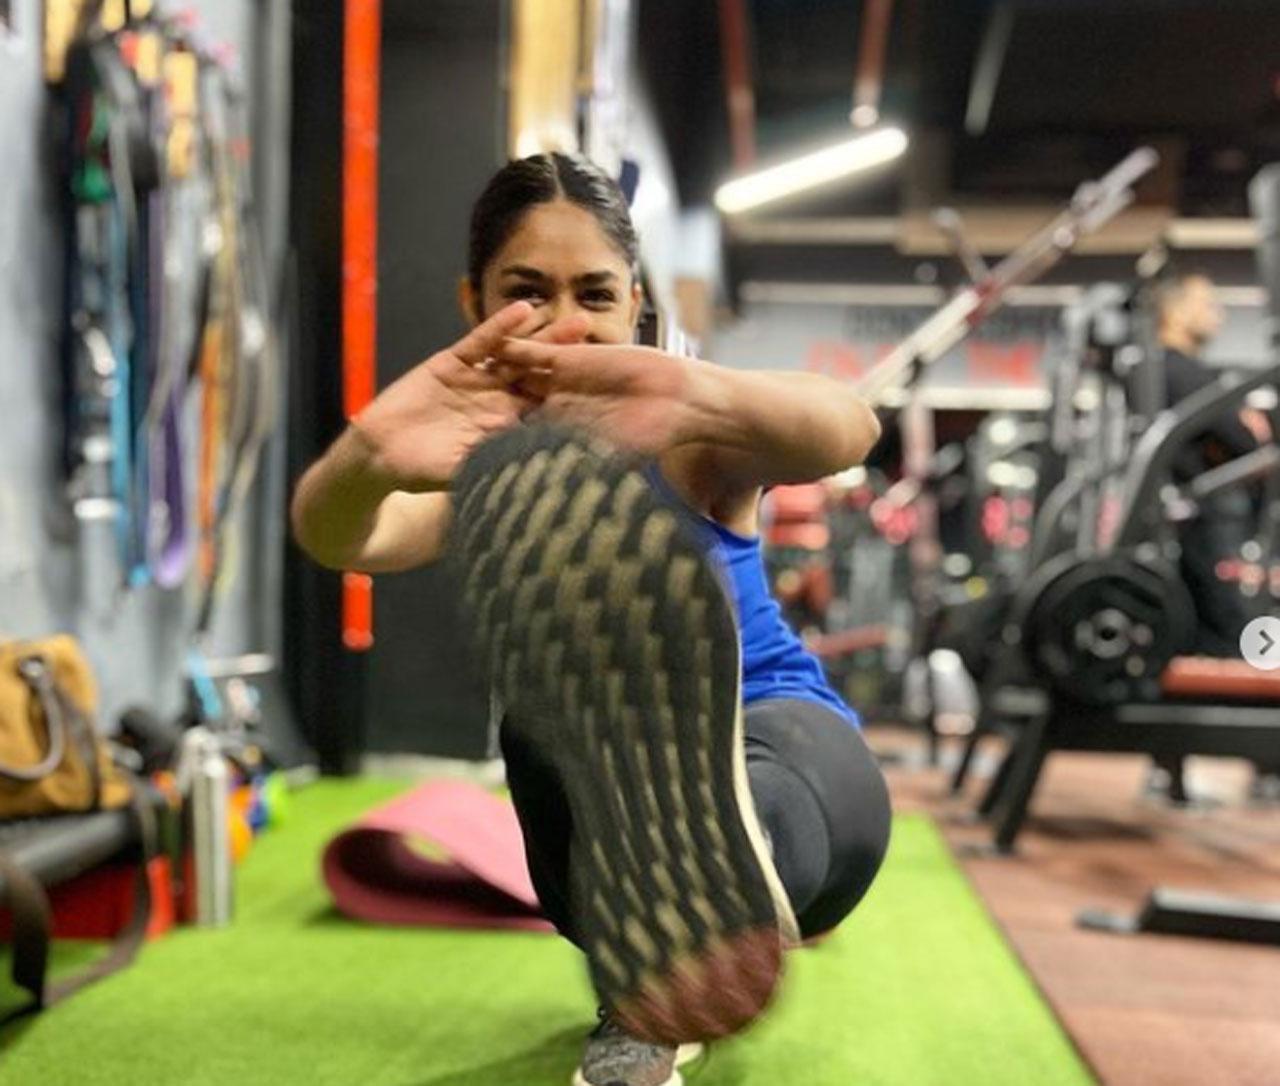 She’s working out and yet, we can sense and see her winning and whacky smile as she enjoys shedding some calories. She amalgamates exhaustion and entertainment together, and that doesn’t happen too frequently. 